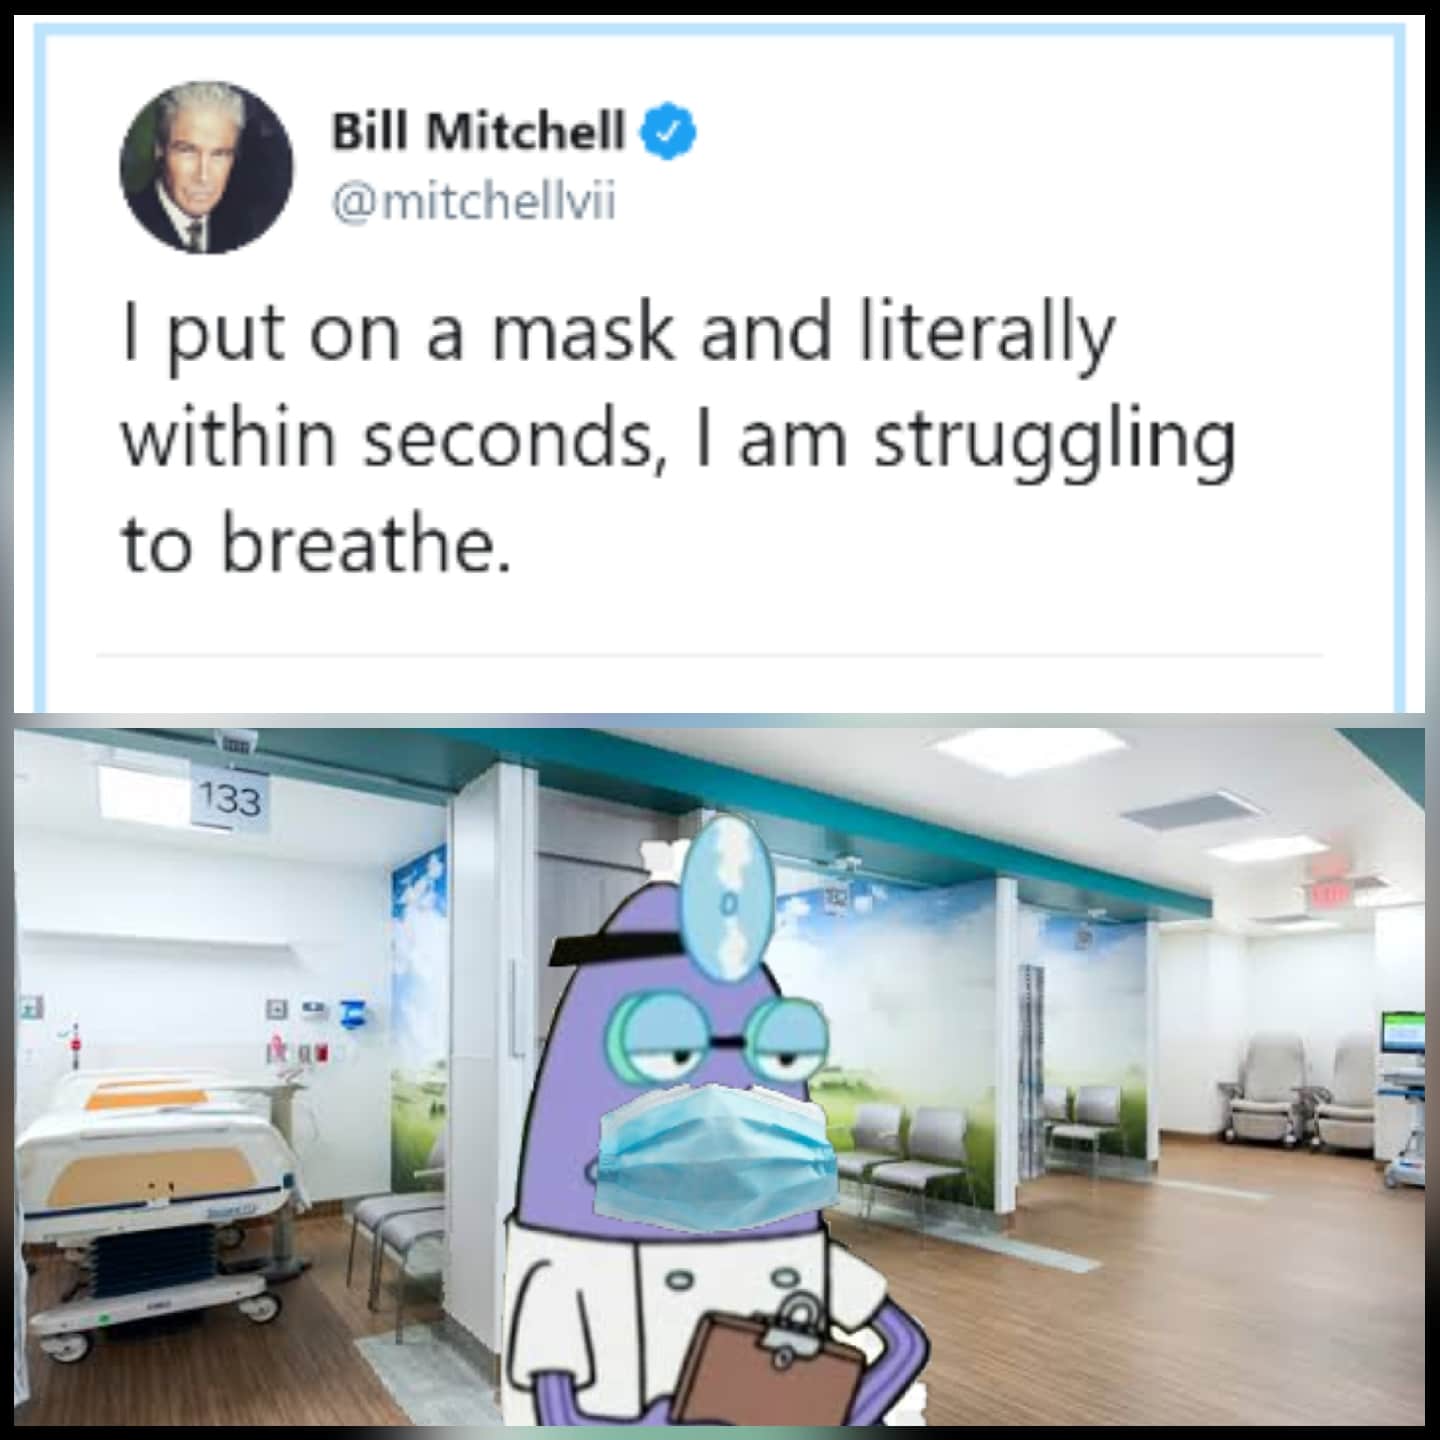 Spongebob, CaNt BreaThE HeLp Spongebob Memes Spongebob, CaNt BreaThE HeLp text: o Bill Mitchell @mitchellvii I put on a mask and literally within seconds, I am struggling to breathe. 